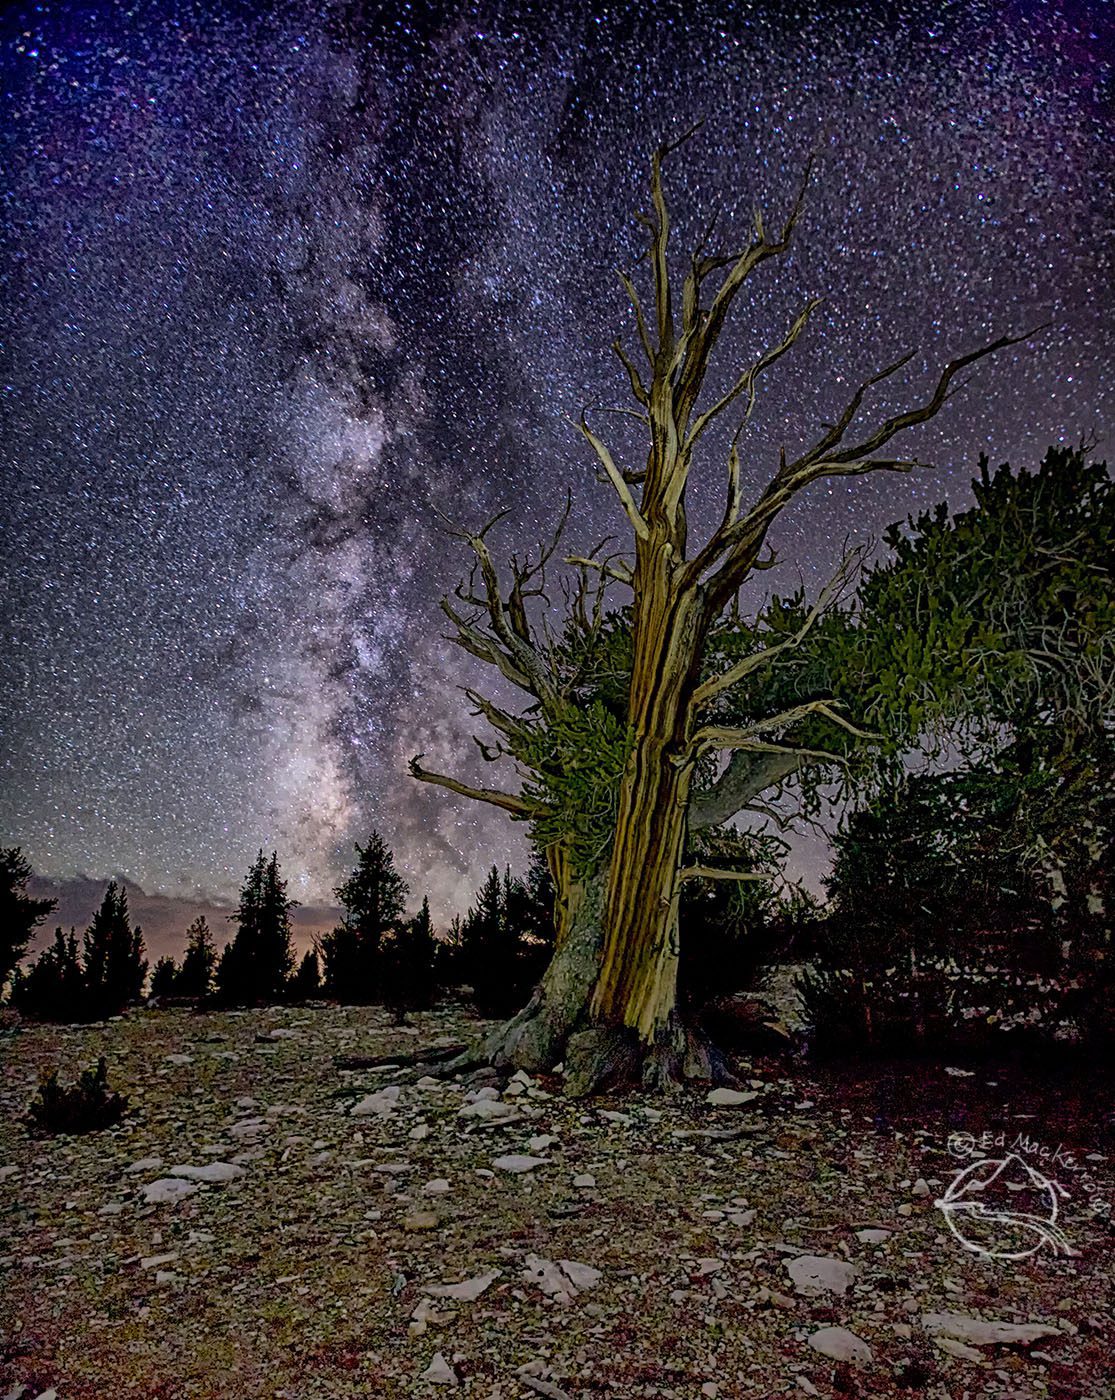 An ancient bristlecone pine experiences another night under the stars in the White Mountains of California.